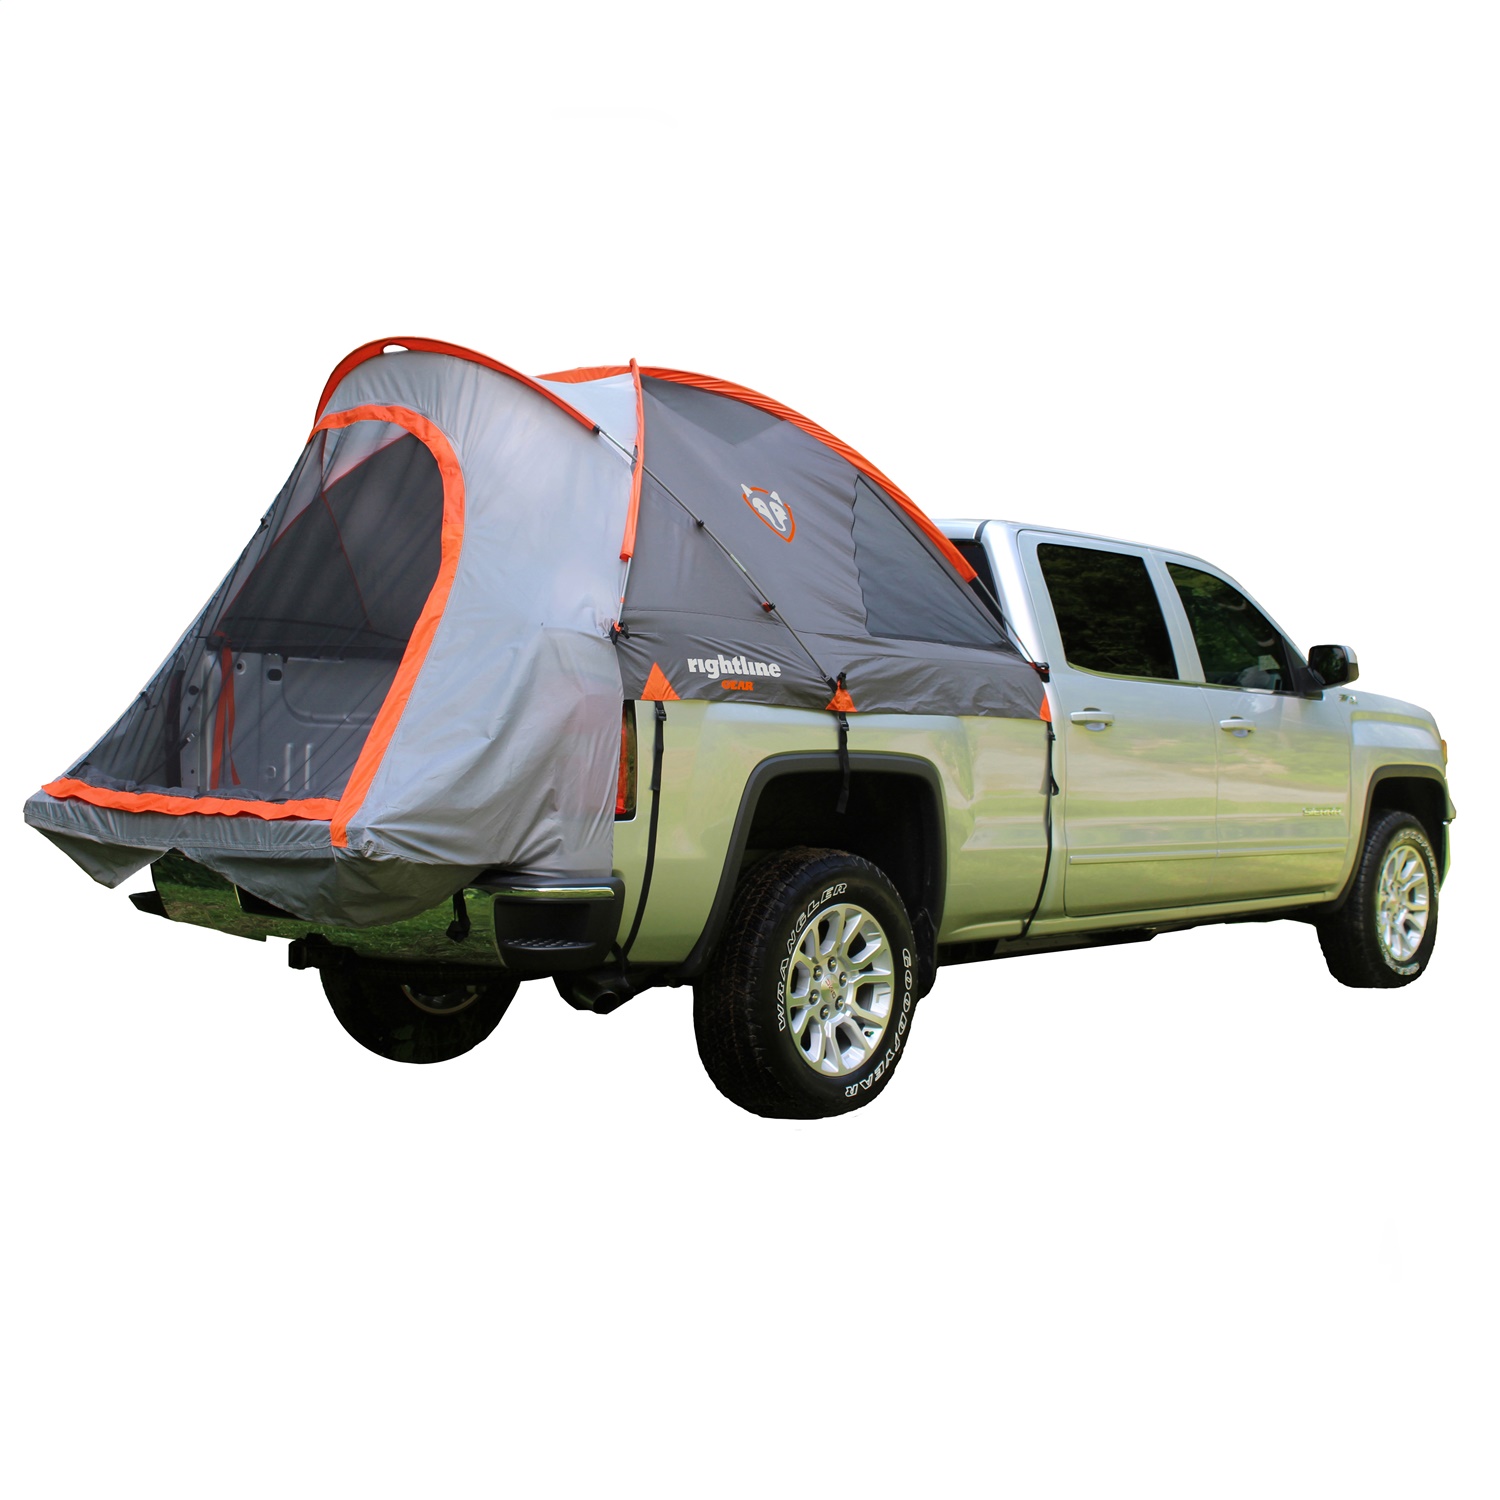 Rightline Gear 110760 Truck Bed Tent Fits 05-21 Frontier Tacoma